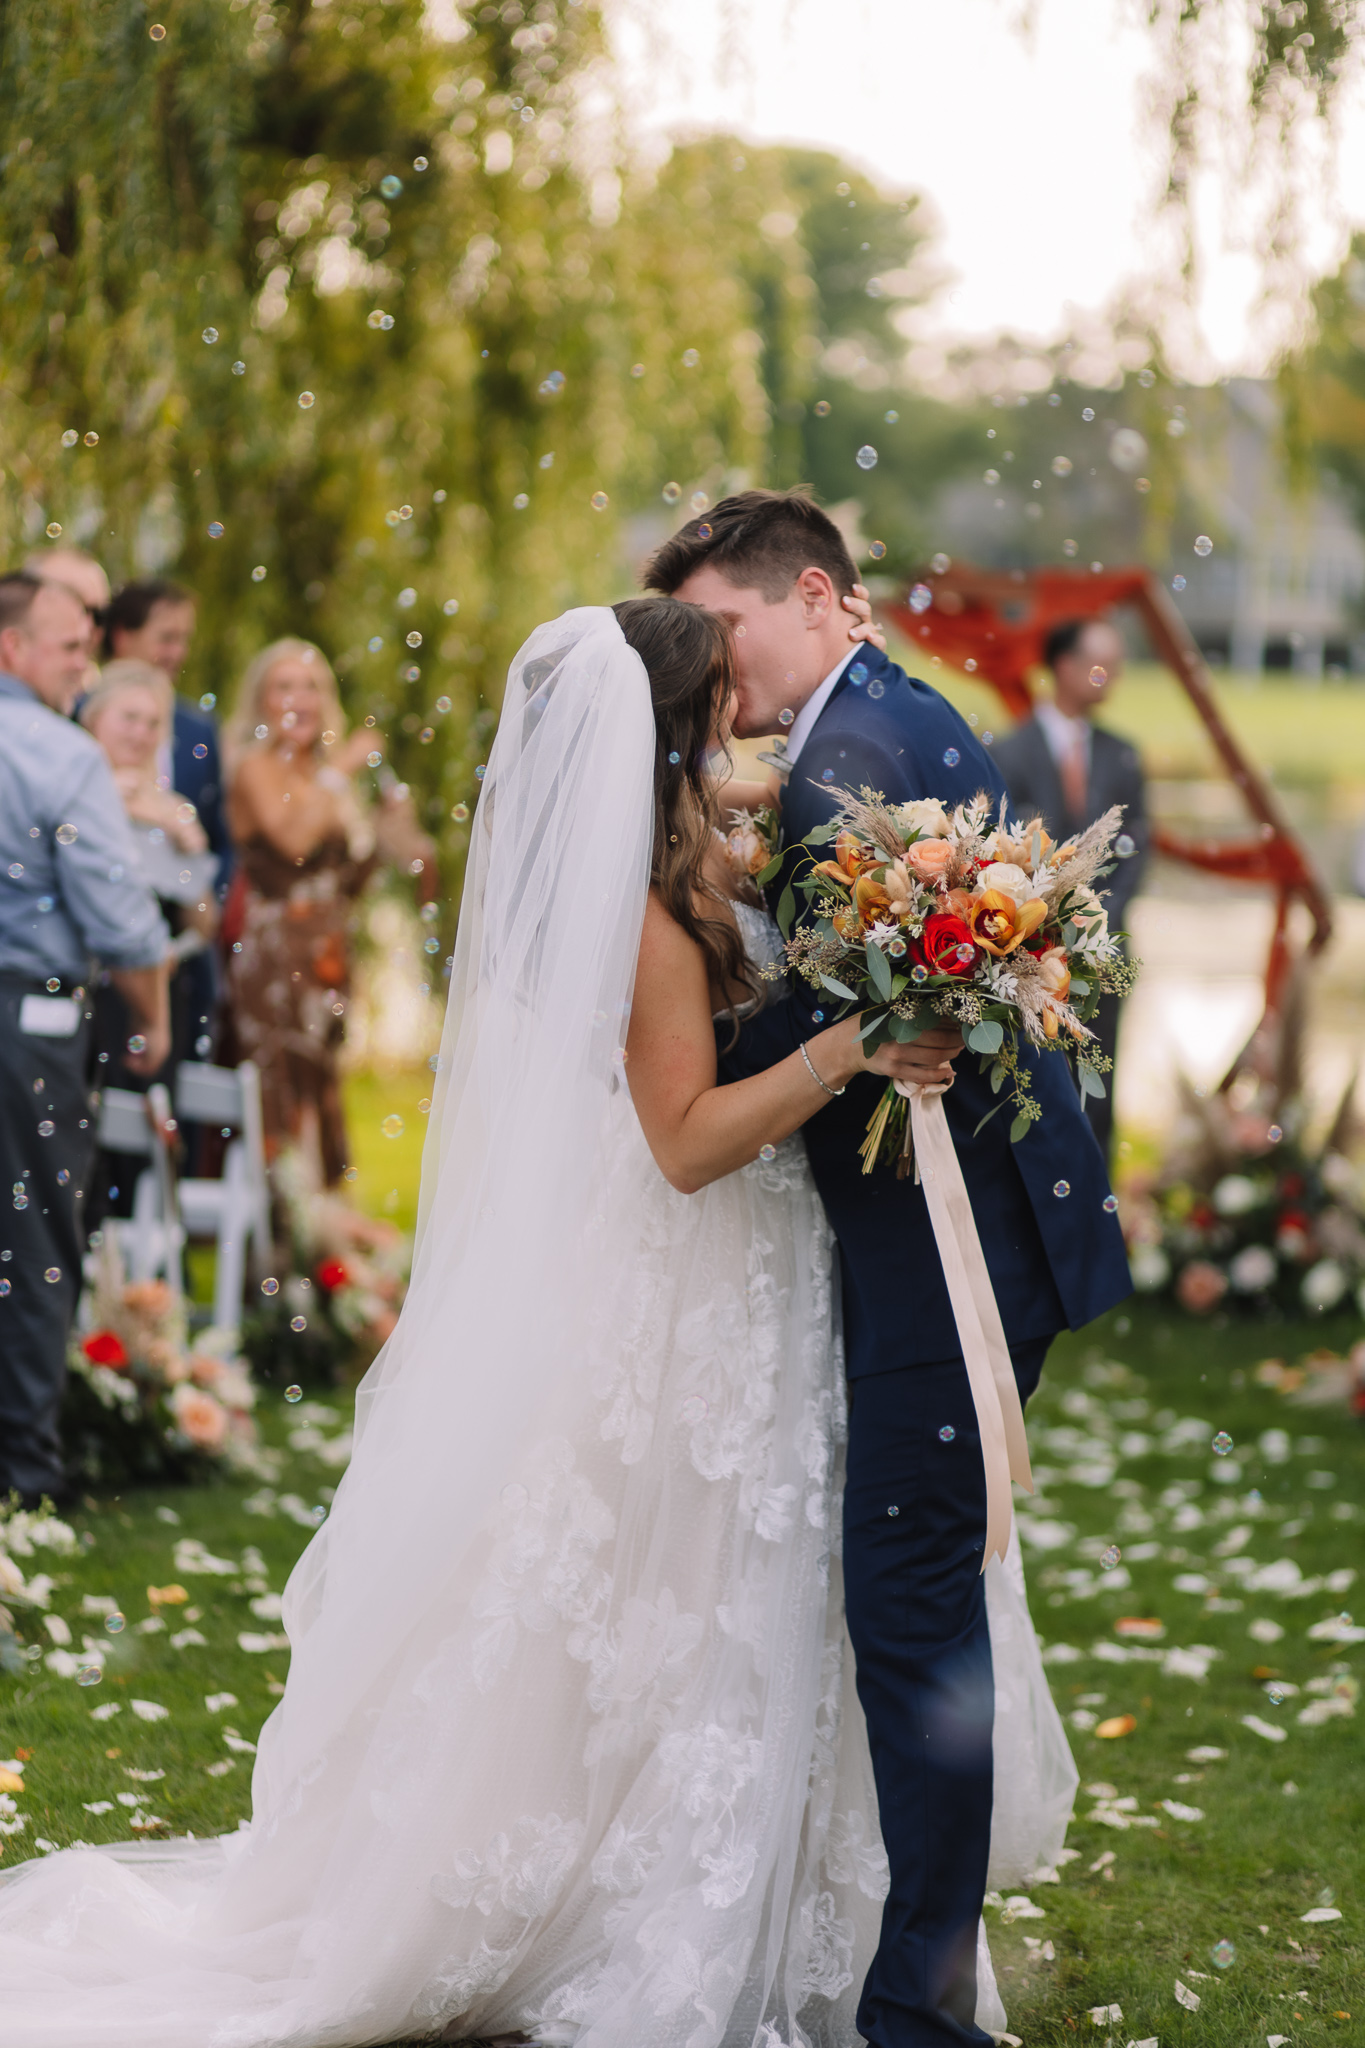 Bride and Groom First Kiss surrounded by bubbles between the willow trees at the Oak Glen Golf Club